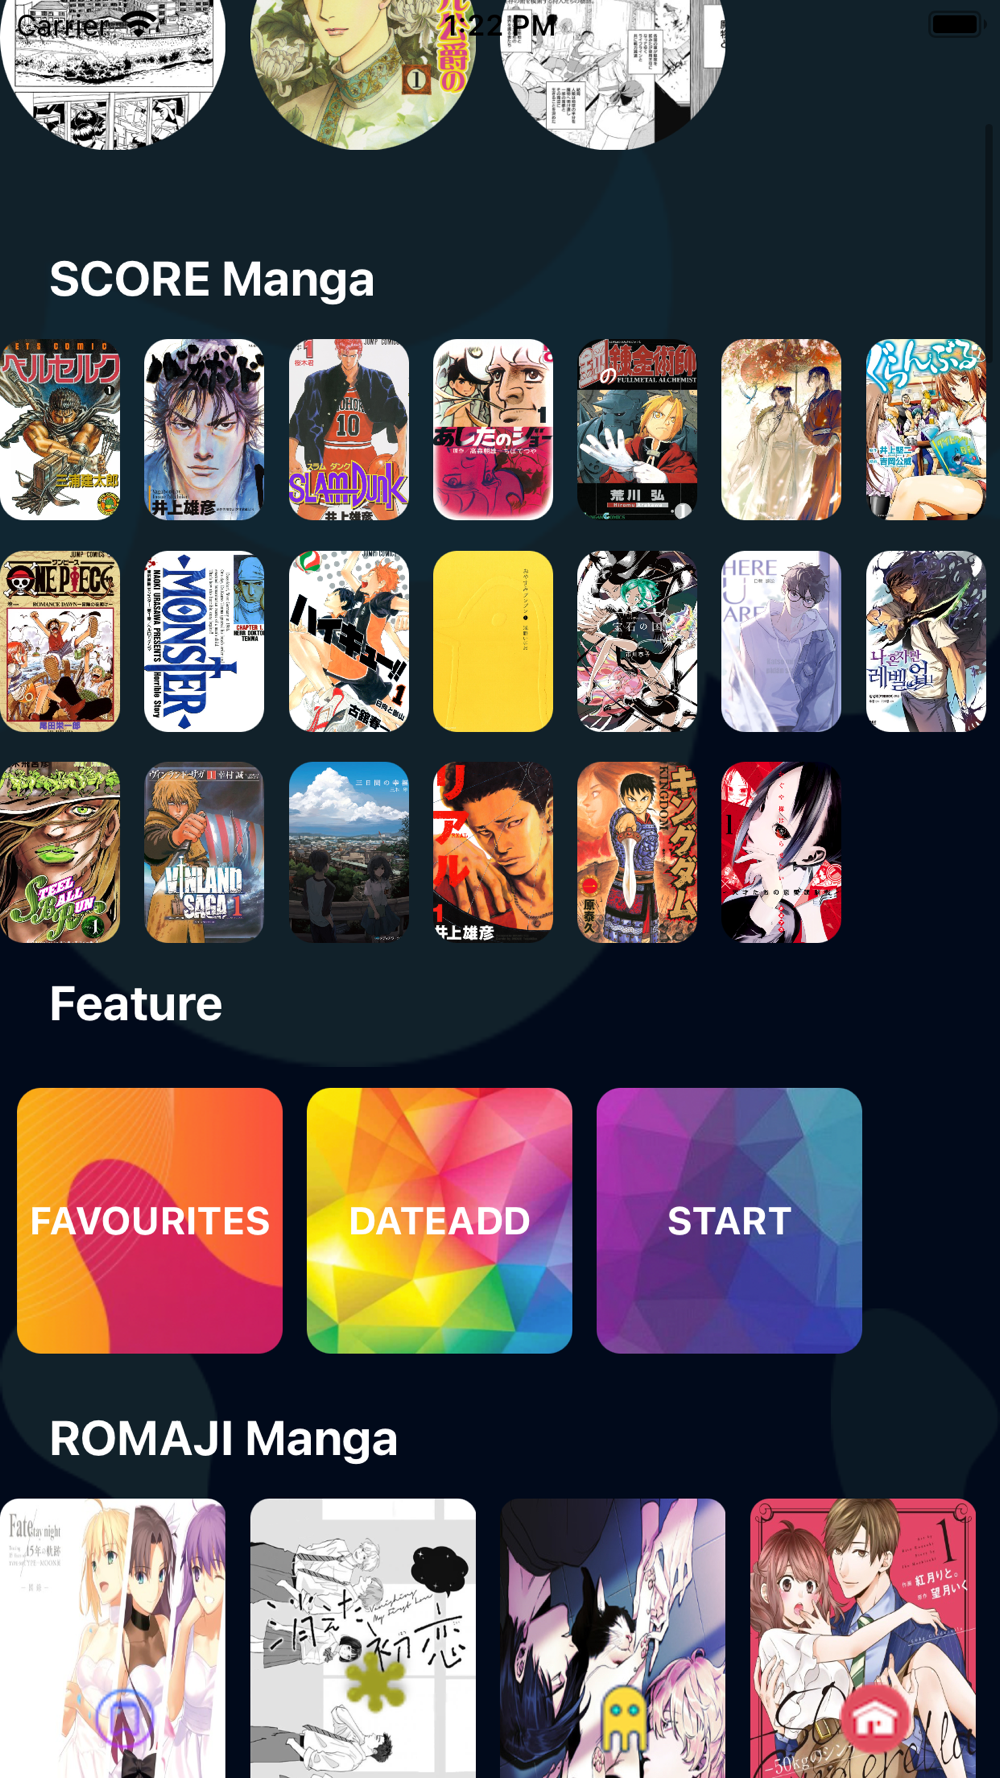 About: KATSU by Orion (iOS App Store version)